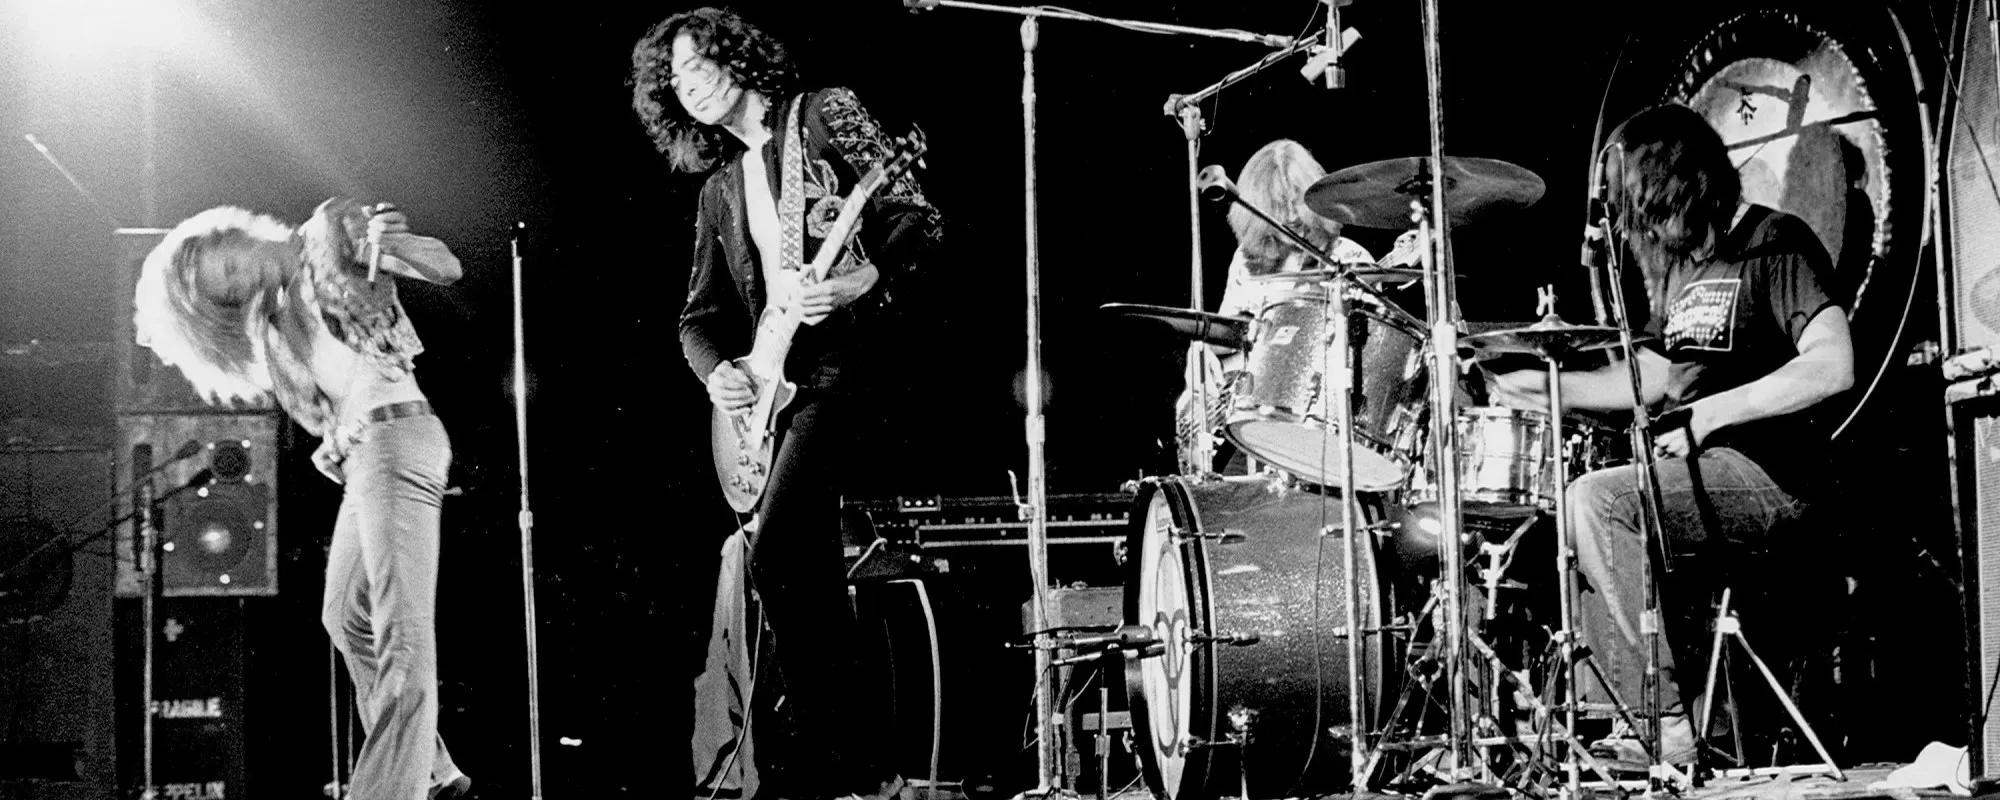 Rights to First Officially Sanctioned Led Zeppelin Documentary Acquired by Sony Pictures Classics [Video]